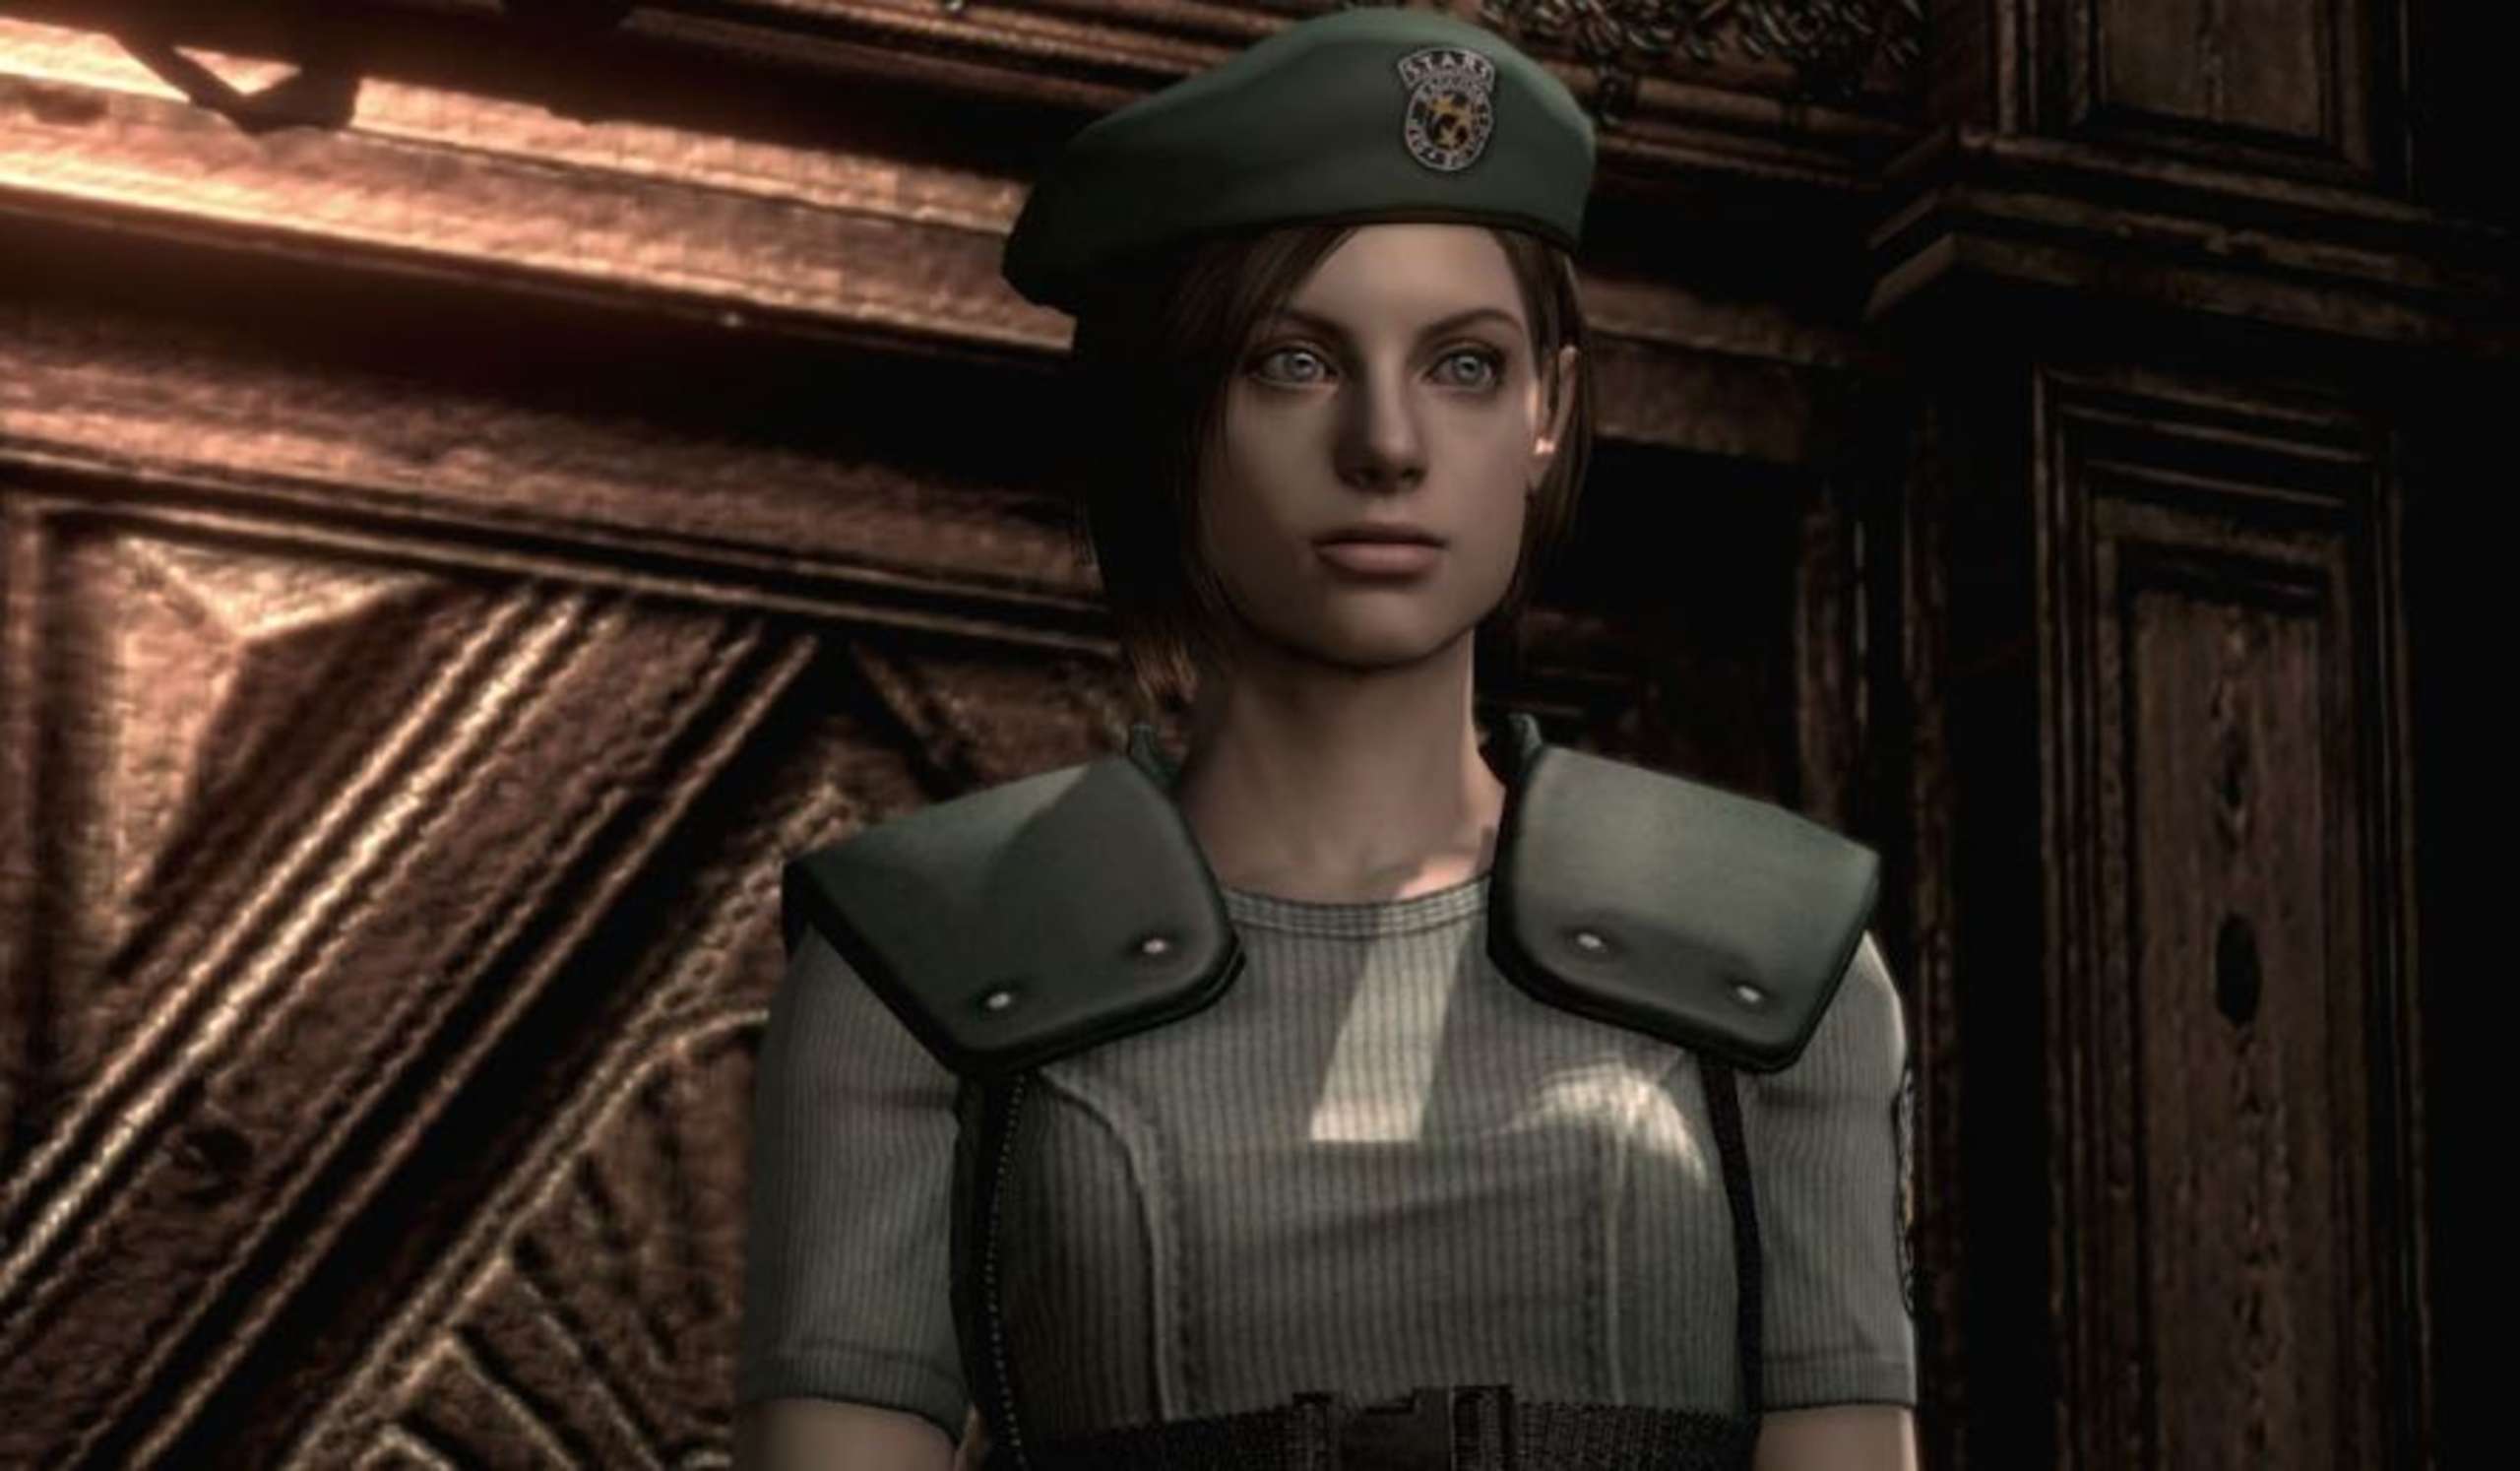 As A First Attempt, This Portrayal Of Resident Evil 1’s Jill Valentine Is Incredibly Accurate And Pays Due Homage To The Legendary Character